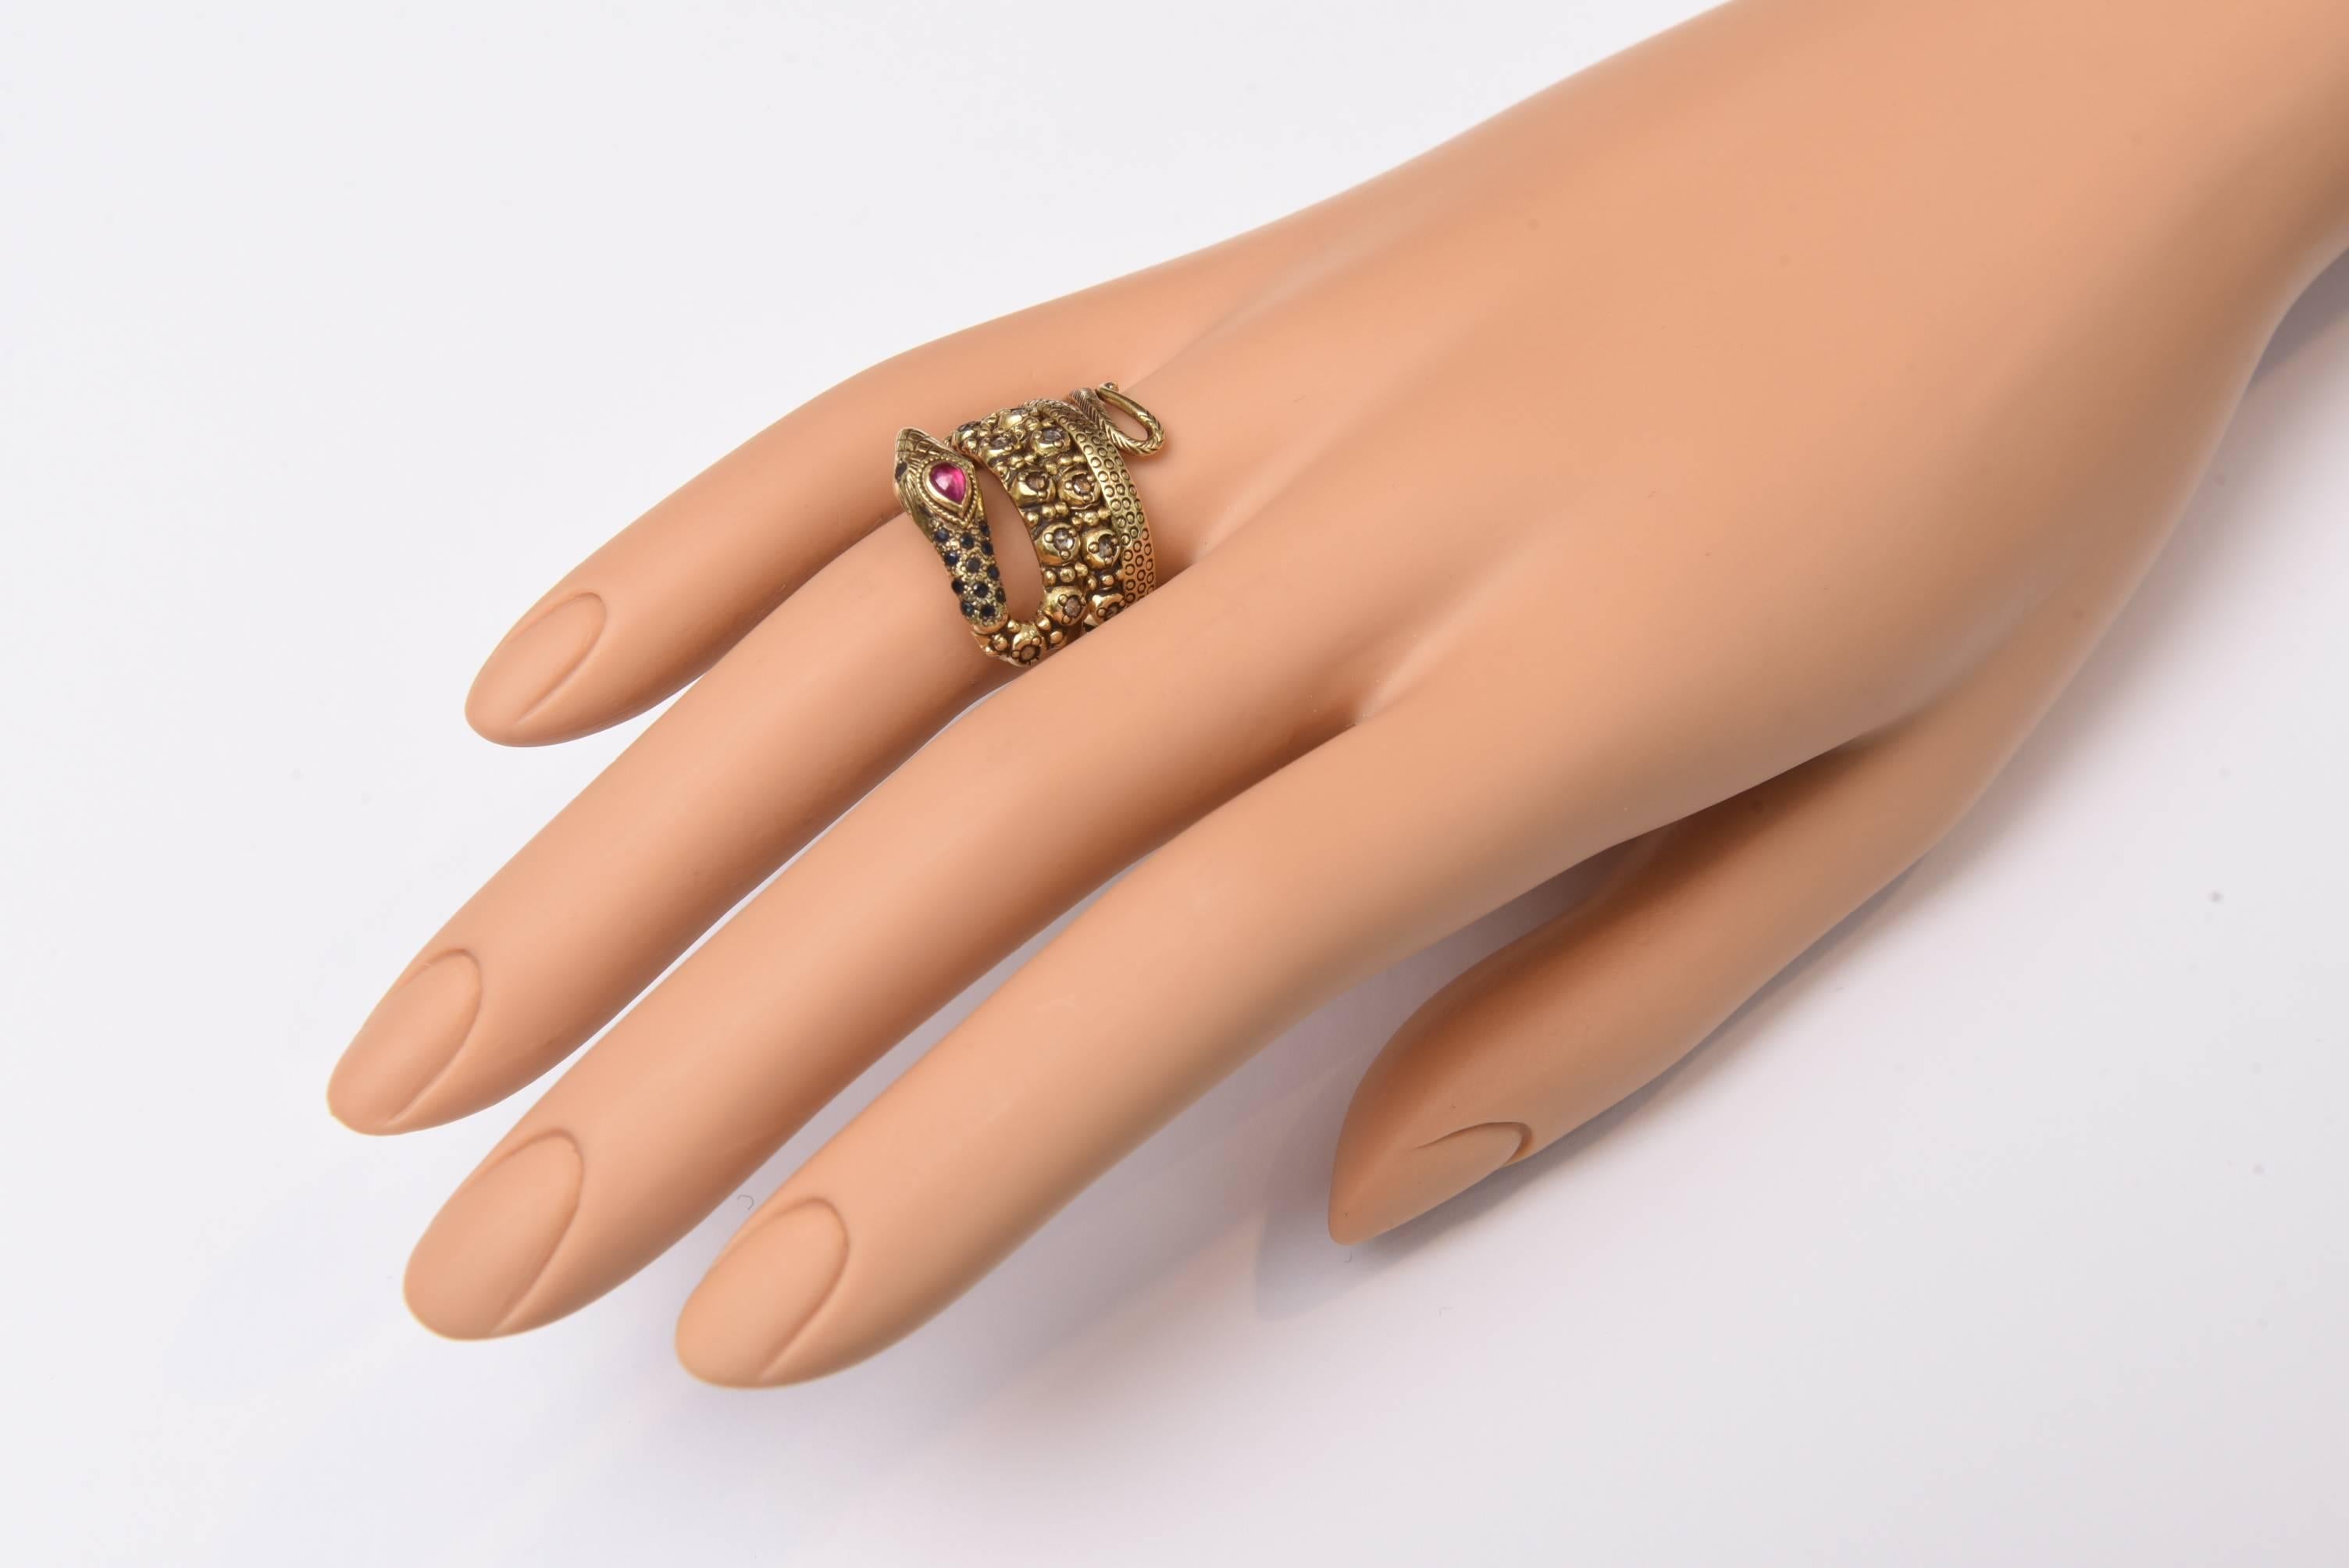 18K gold coil snake ring with faceted diamonds around the band, pave`set sapphires at the neck and eyes, and a pear-shaped faceted ruby for the third eye.  Lovely granulation work and hand-tooling.  Ring size is 7.5.